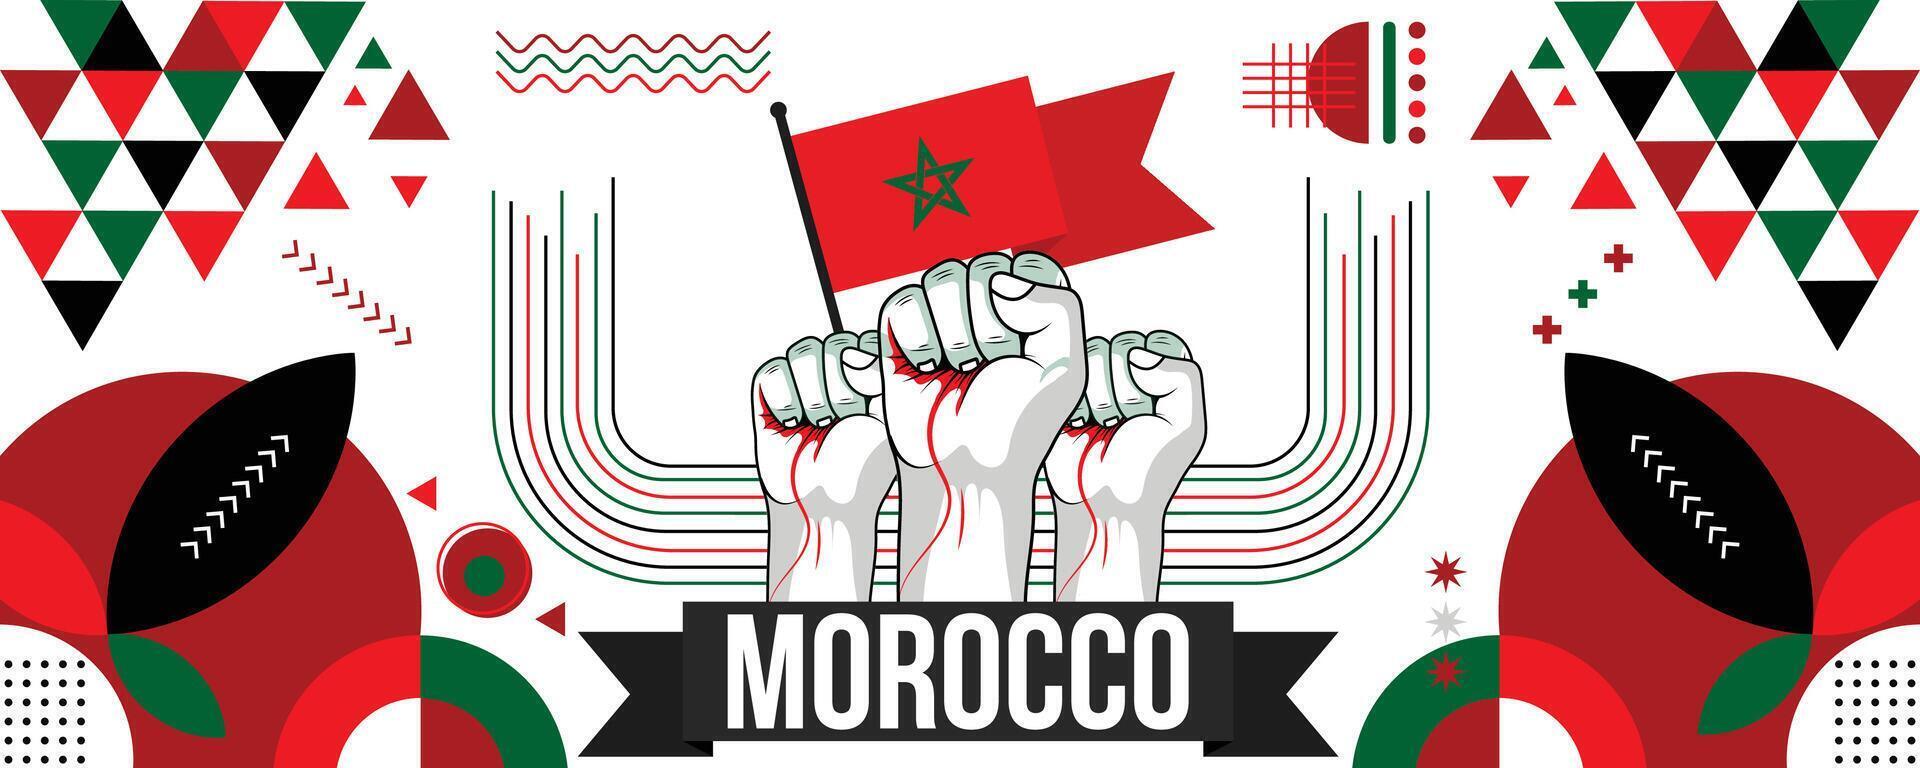 Morocco national or independence day banner design for country celebration. Flag of Morocco modern retro design abstract geometric icons. Vector illustration